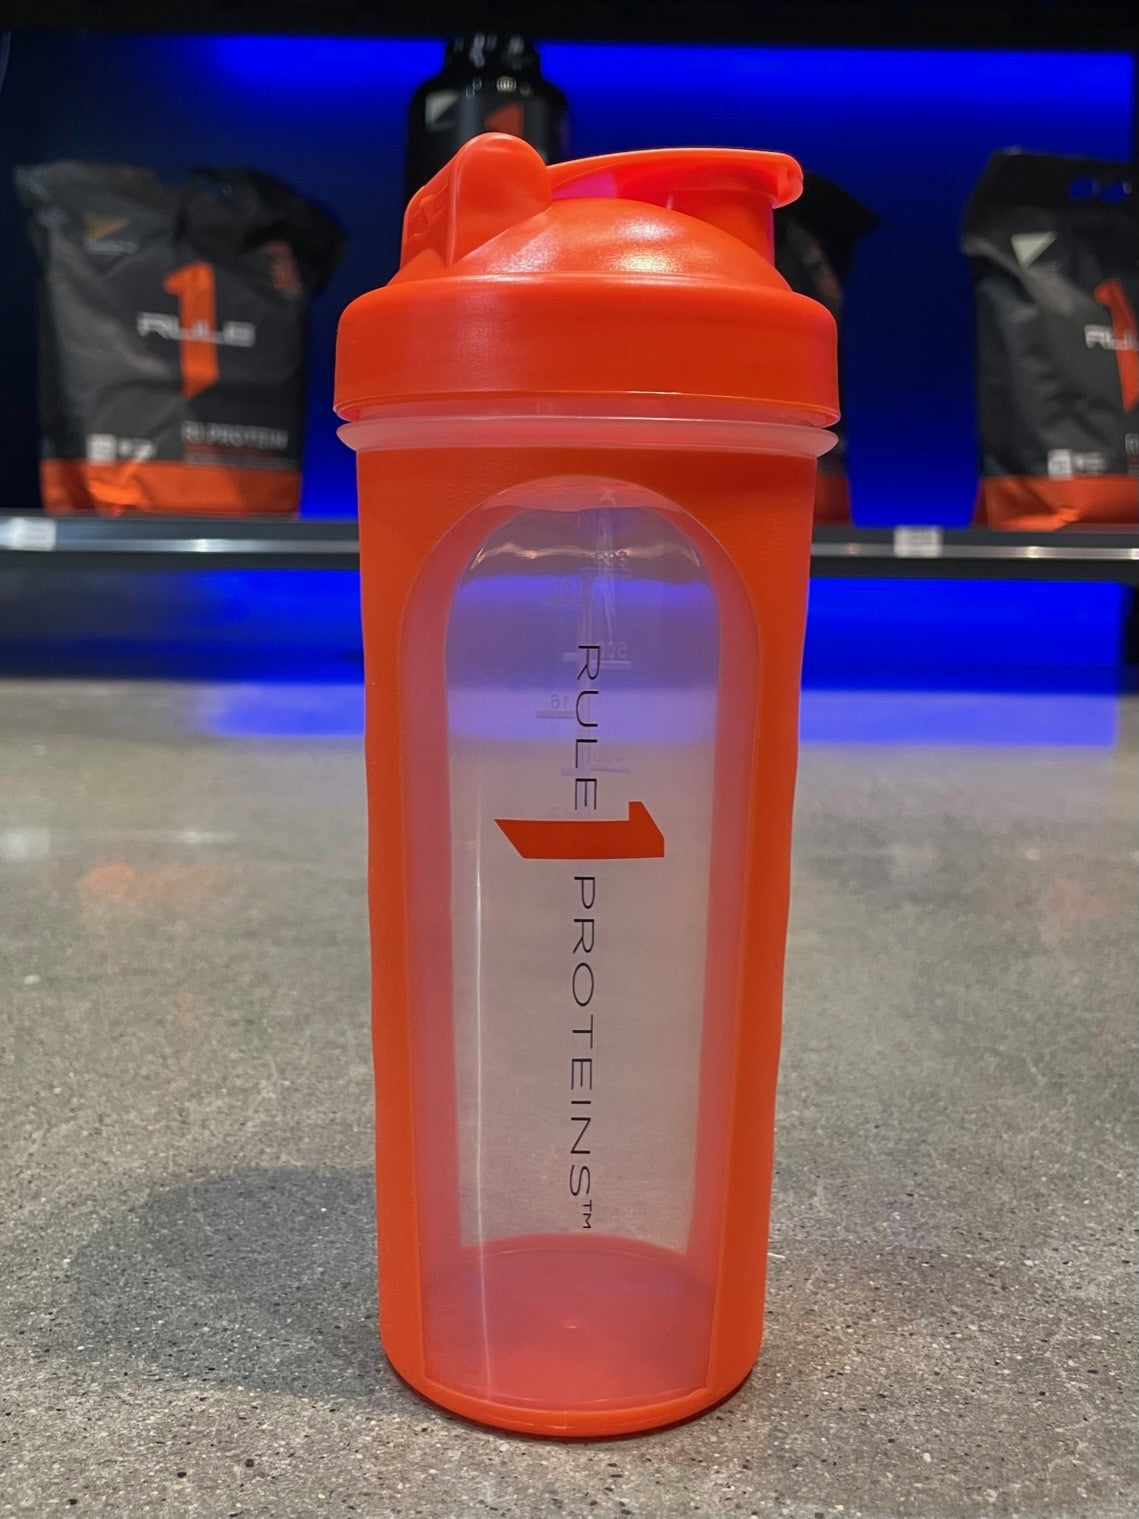 preLIFT Shaker Cup - Red